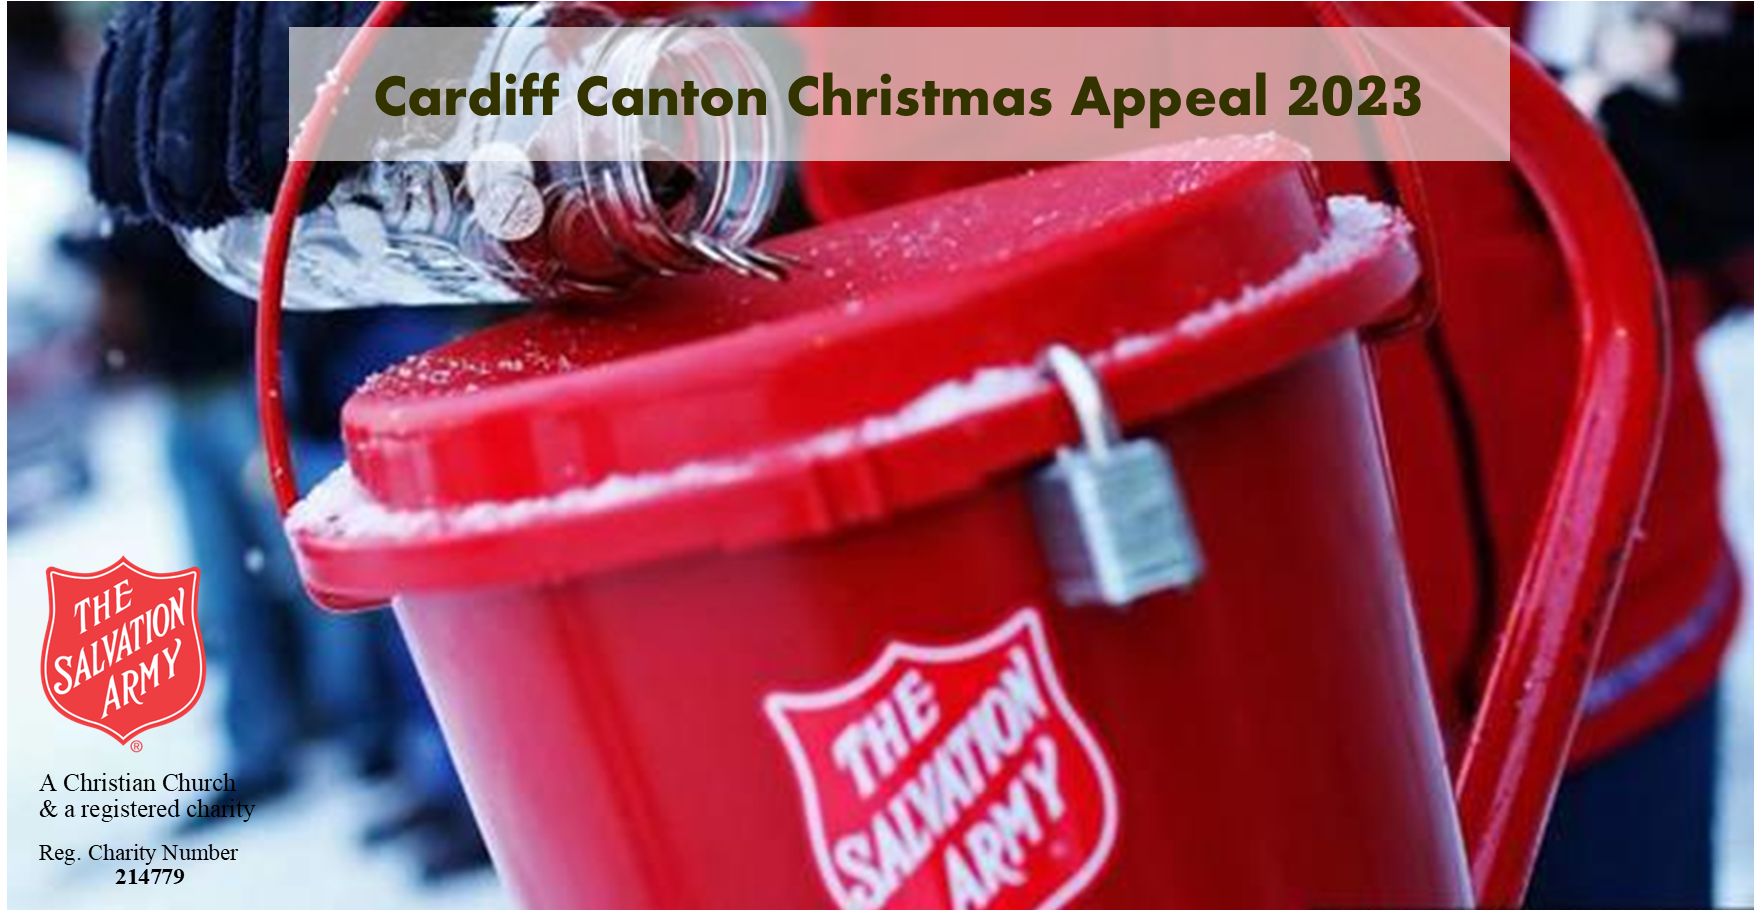 Cardiff Canton Salvation Army Christmas Appeal 2023